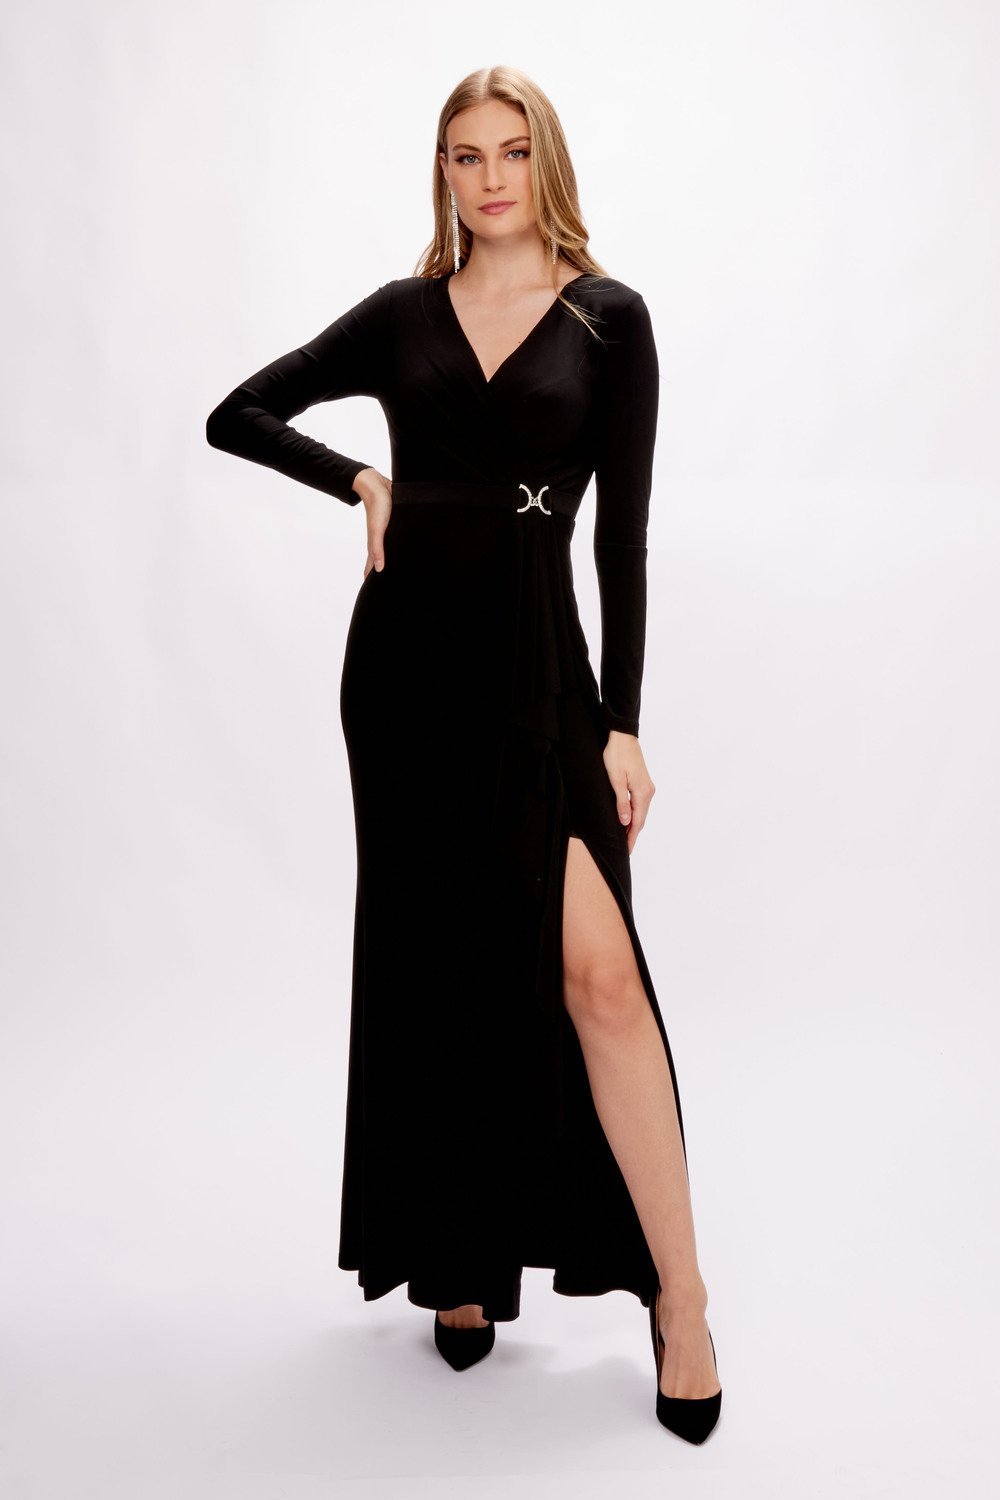 Belted Dress with slit Style 233788. Black